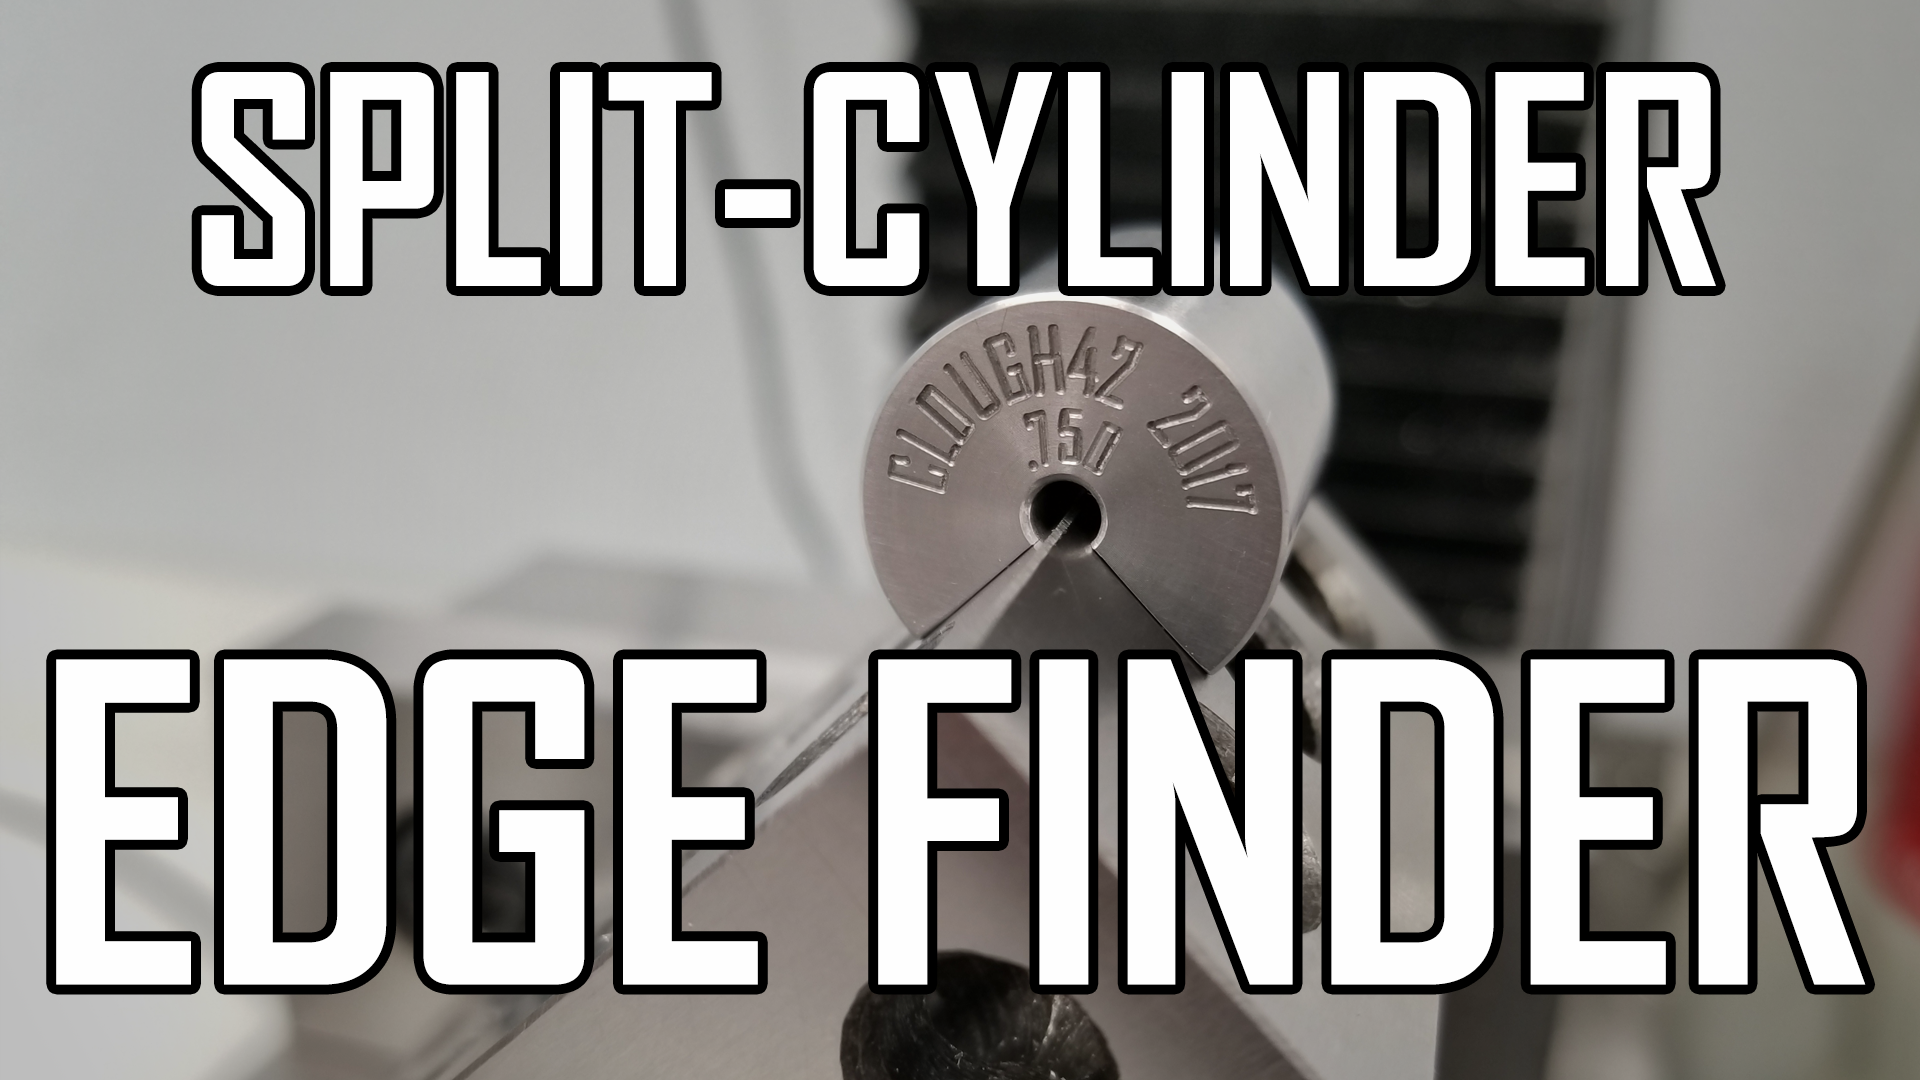 Making a Split-Cylinder Edge Finding Tool